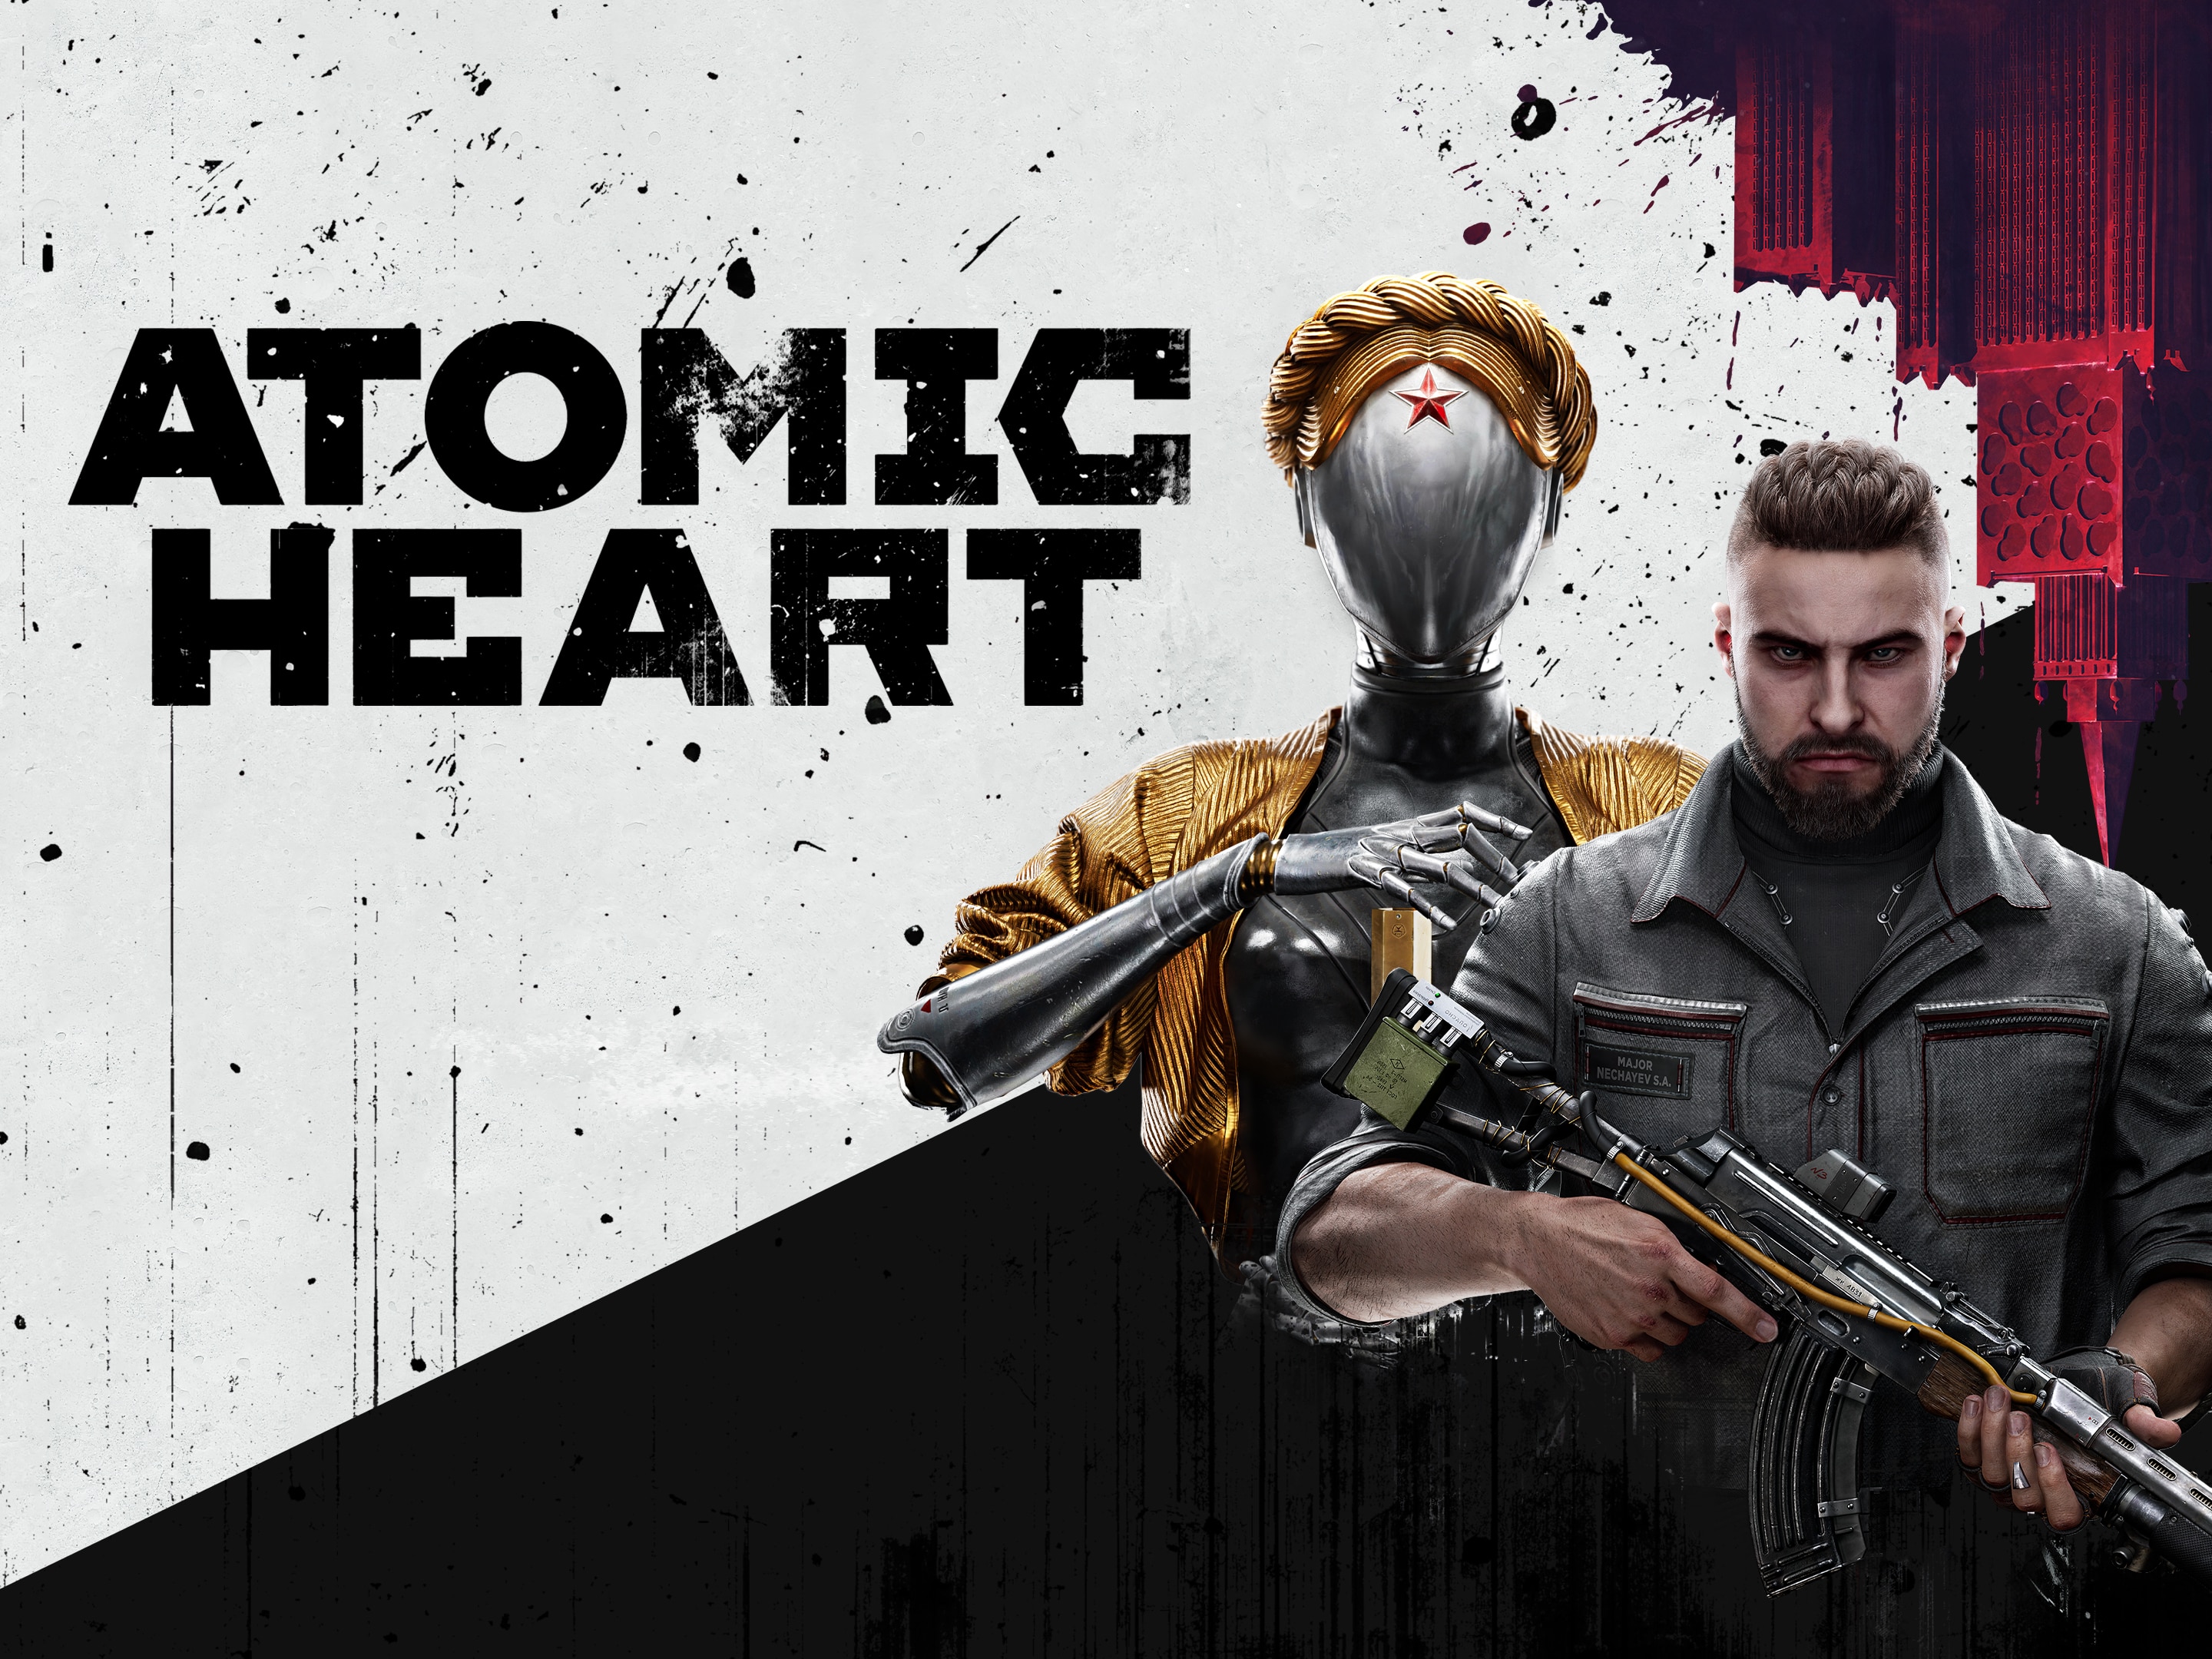 Wallpaper, Atomic Heart, robot, PlayStation, Xbox, PC gaming, video games, video game characters 2880x2160